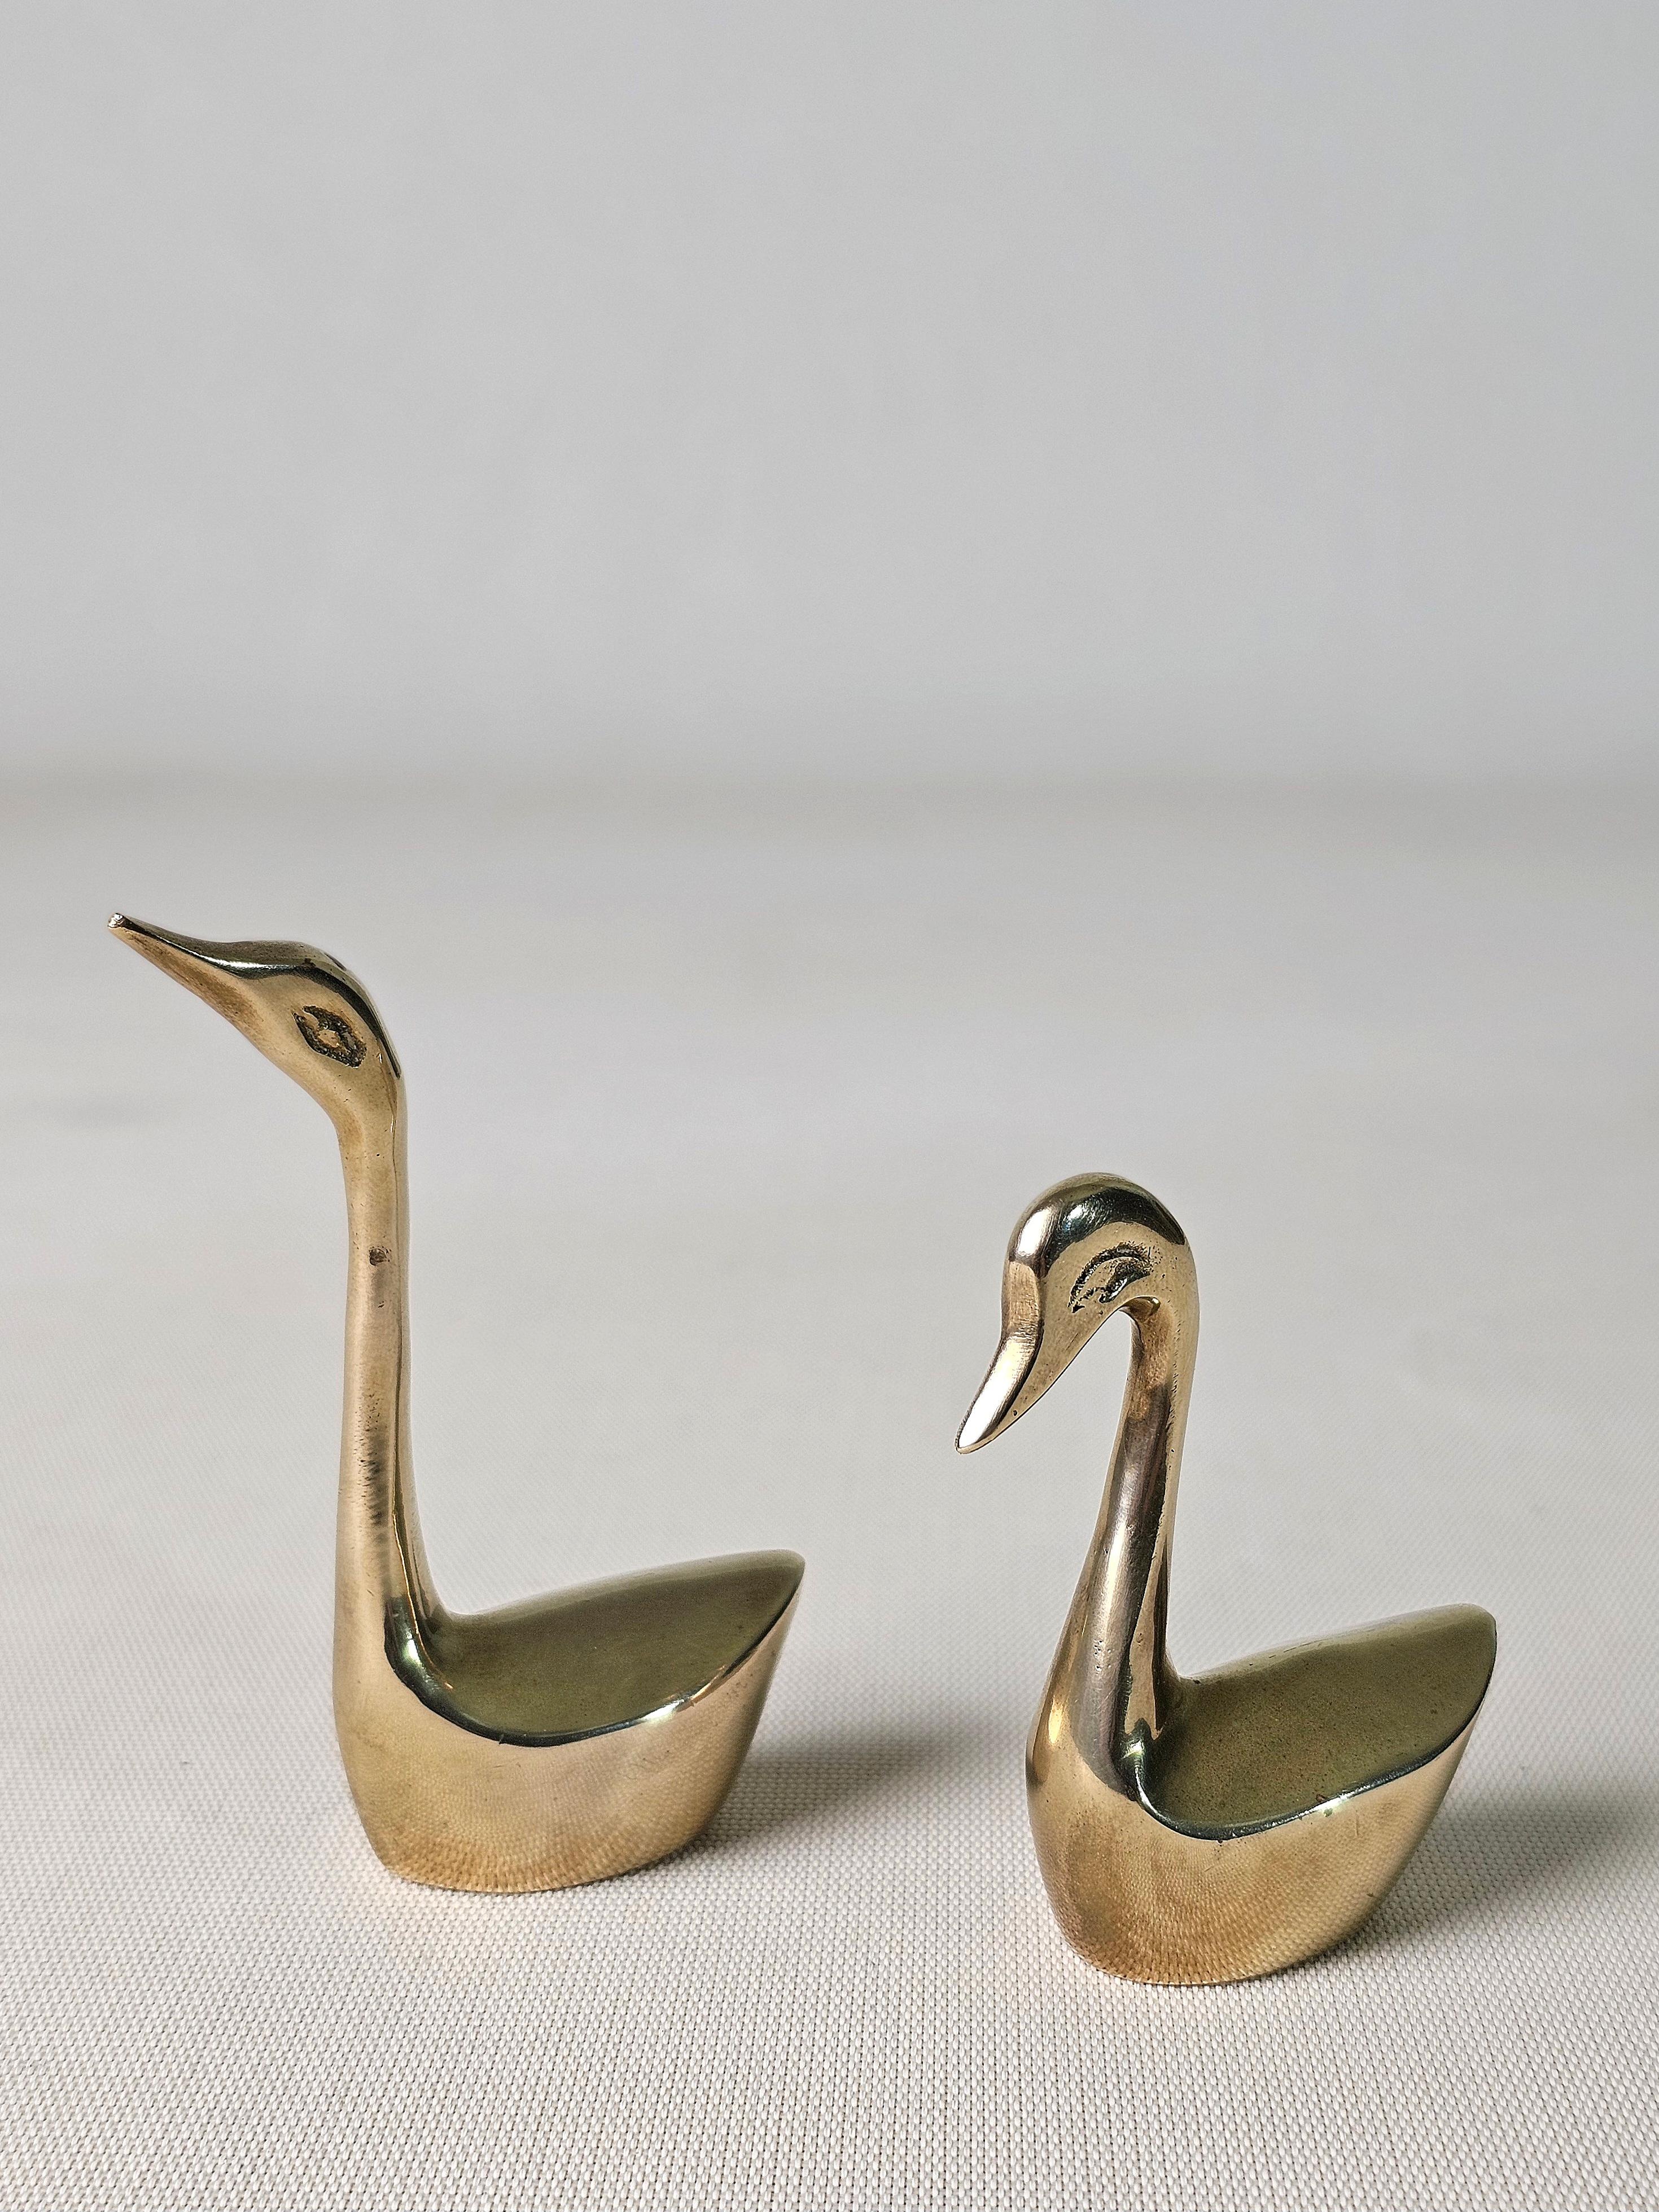 Mid-Century Modern Two Brass Decorative Objects Midcentury Modern Italia 1960/70s For Sale